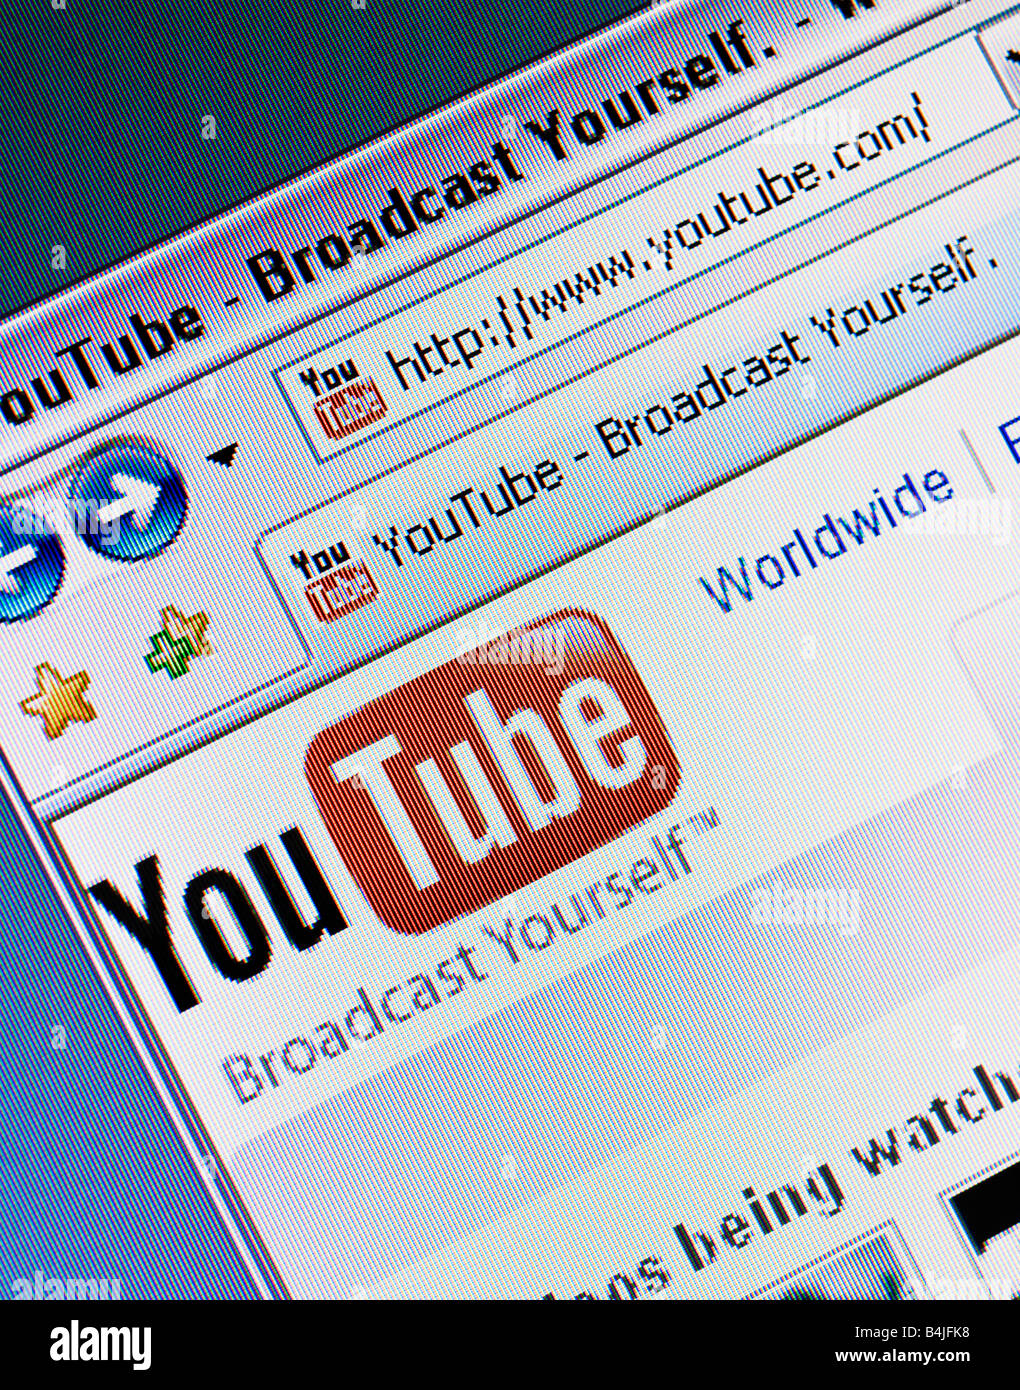 You Tube video sharing site screen and logo Stock Photo